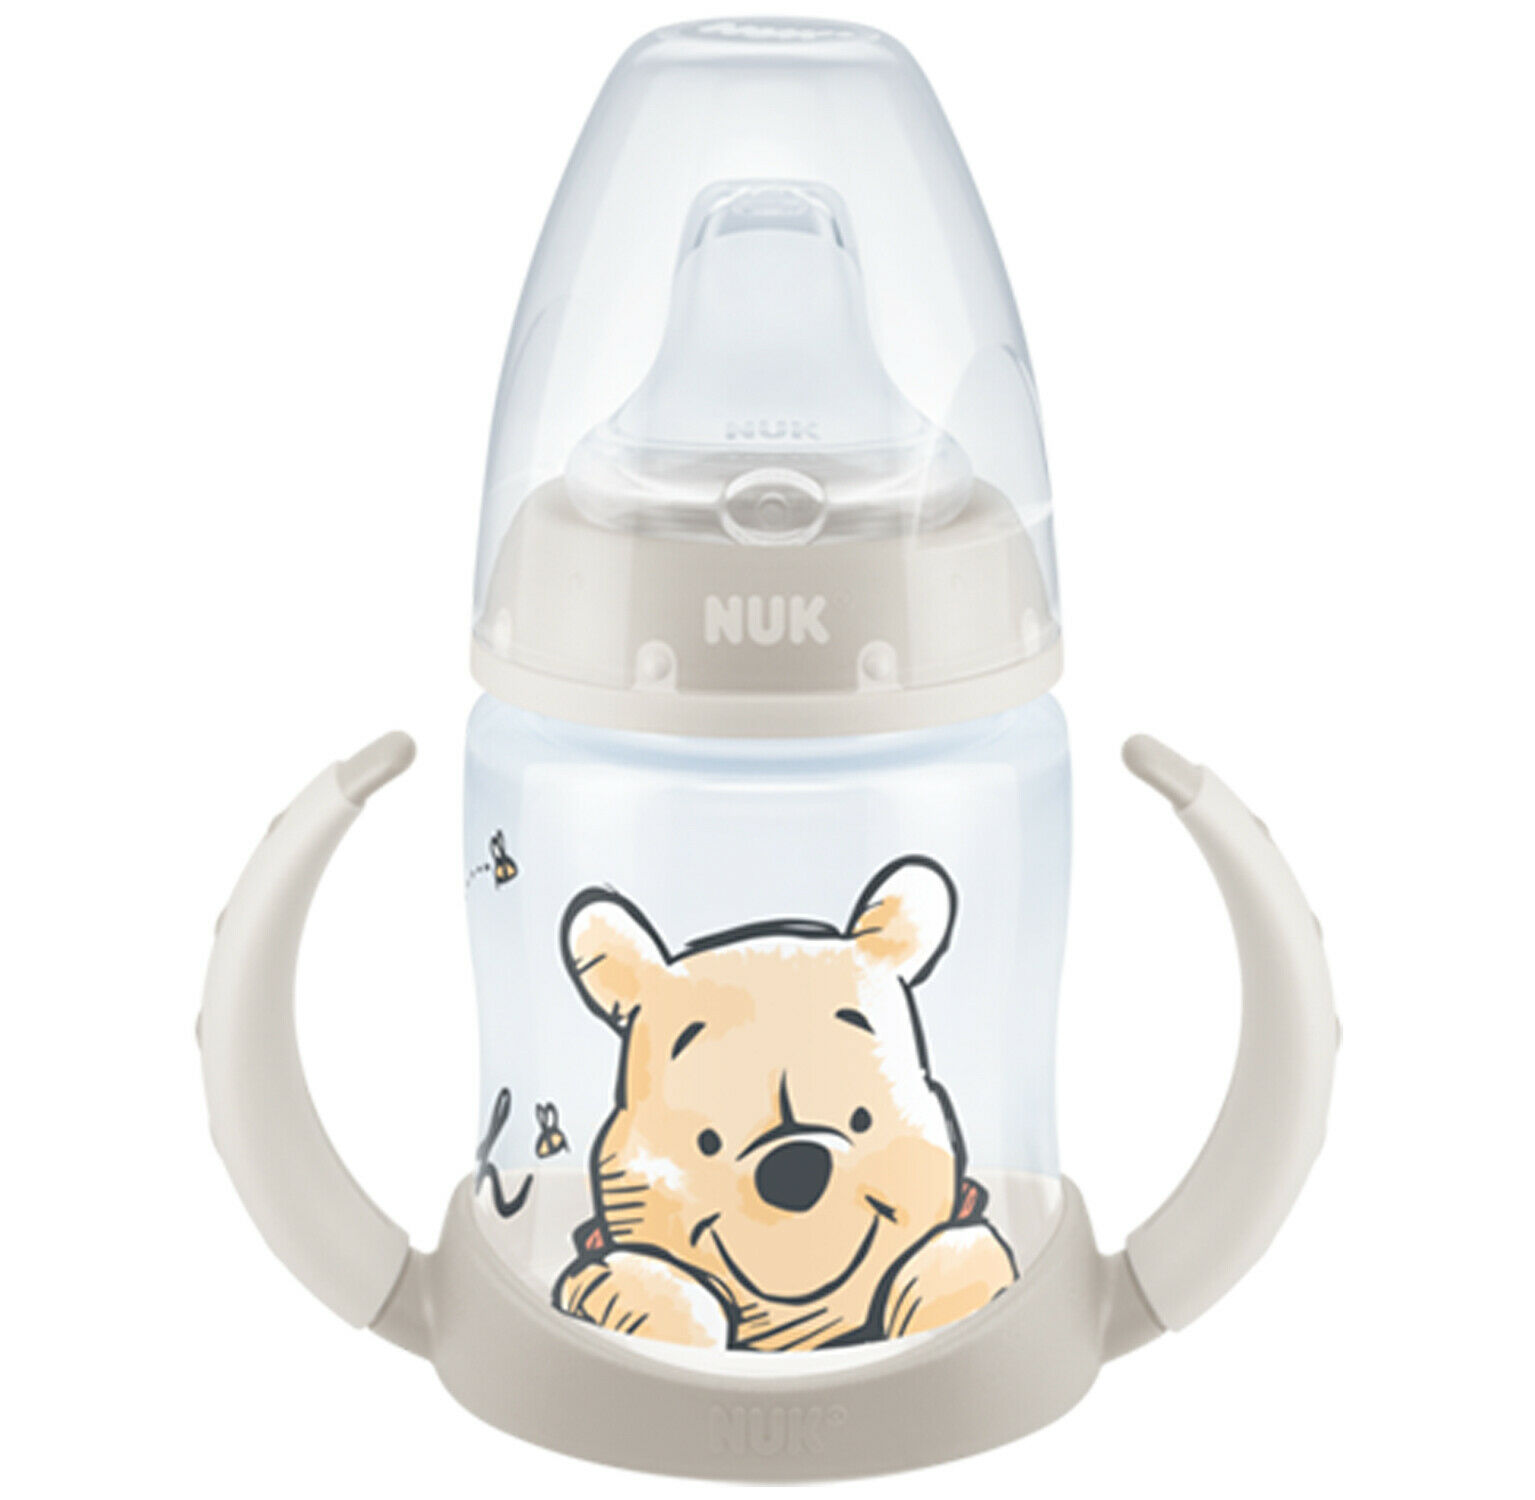 Nuk Winnie The Pooh First Choice + 150ml Bottle 0-6 Months Silicone Teat